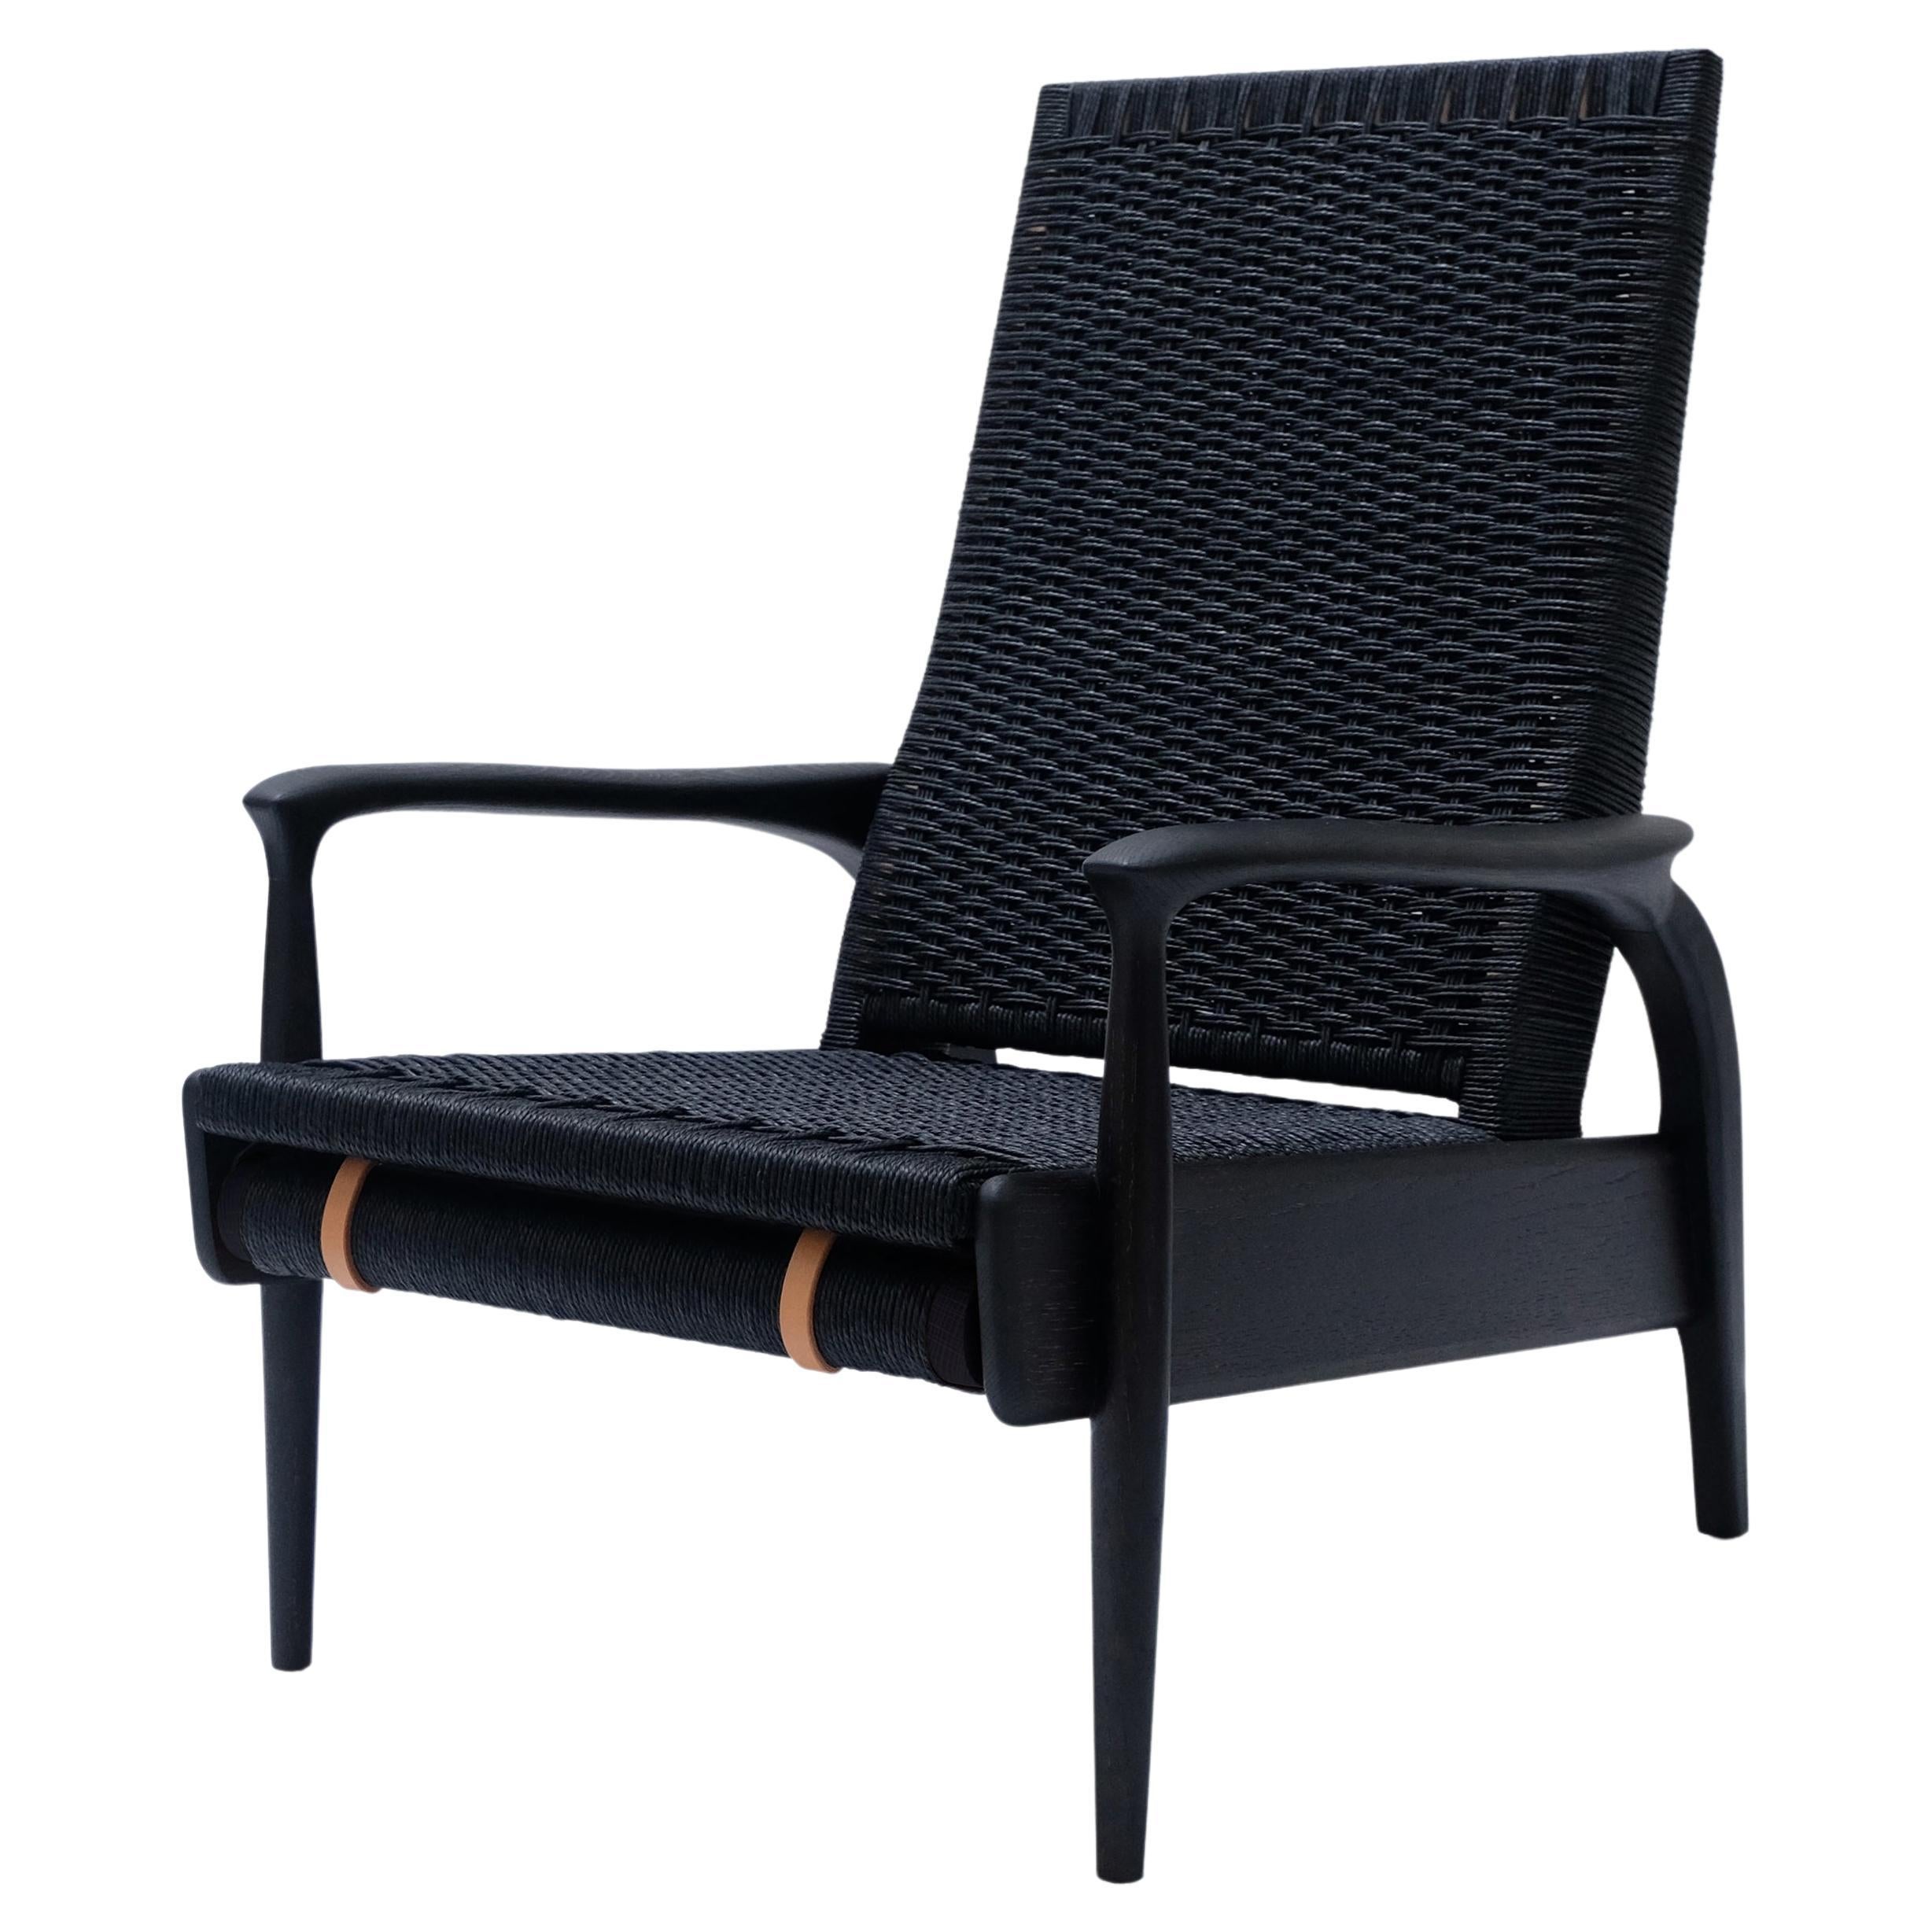 Custom-Made Handcrafted Reclining Eco Lounge Chairs FENDRIK by Studio180degree
Shown in Sustainable Solid Natural Blackened Oak and Black Original Danish Cord

Noble - Tactile – Refined - Sustainable
Reclining Eco lounge chair FENDRIK is a noble Eco